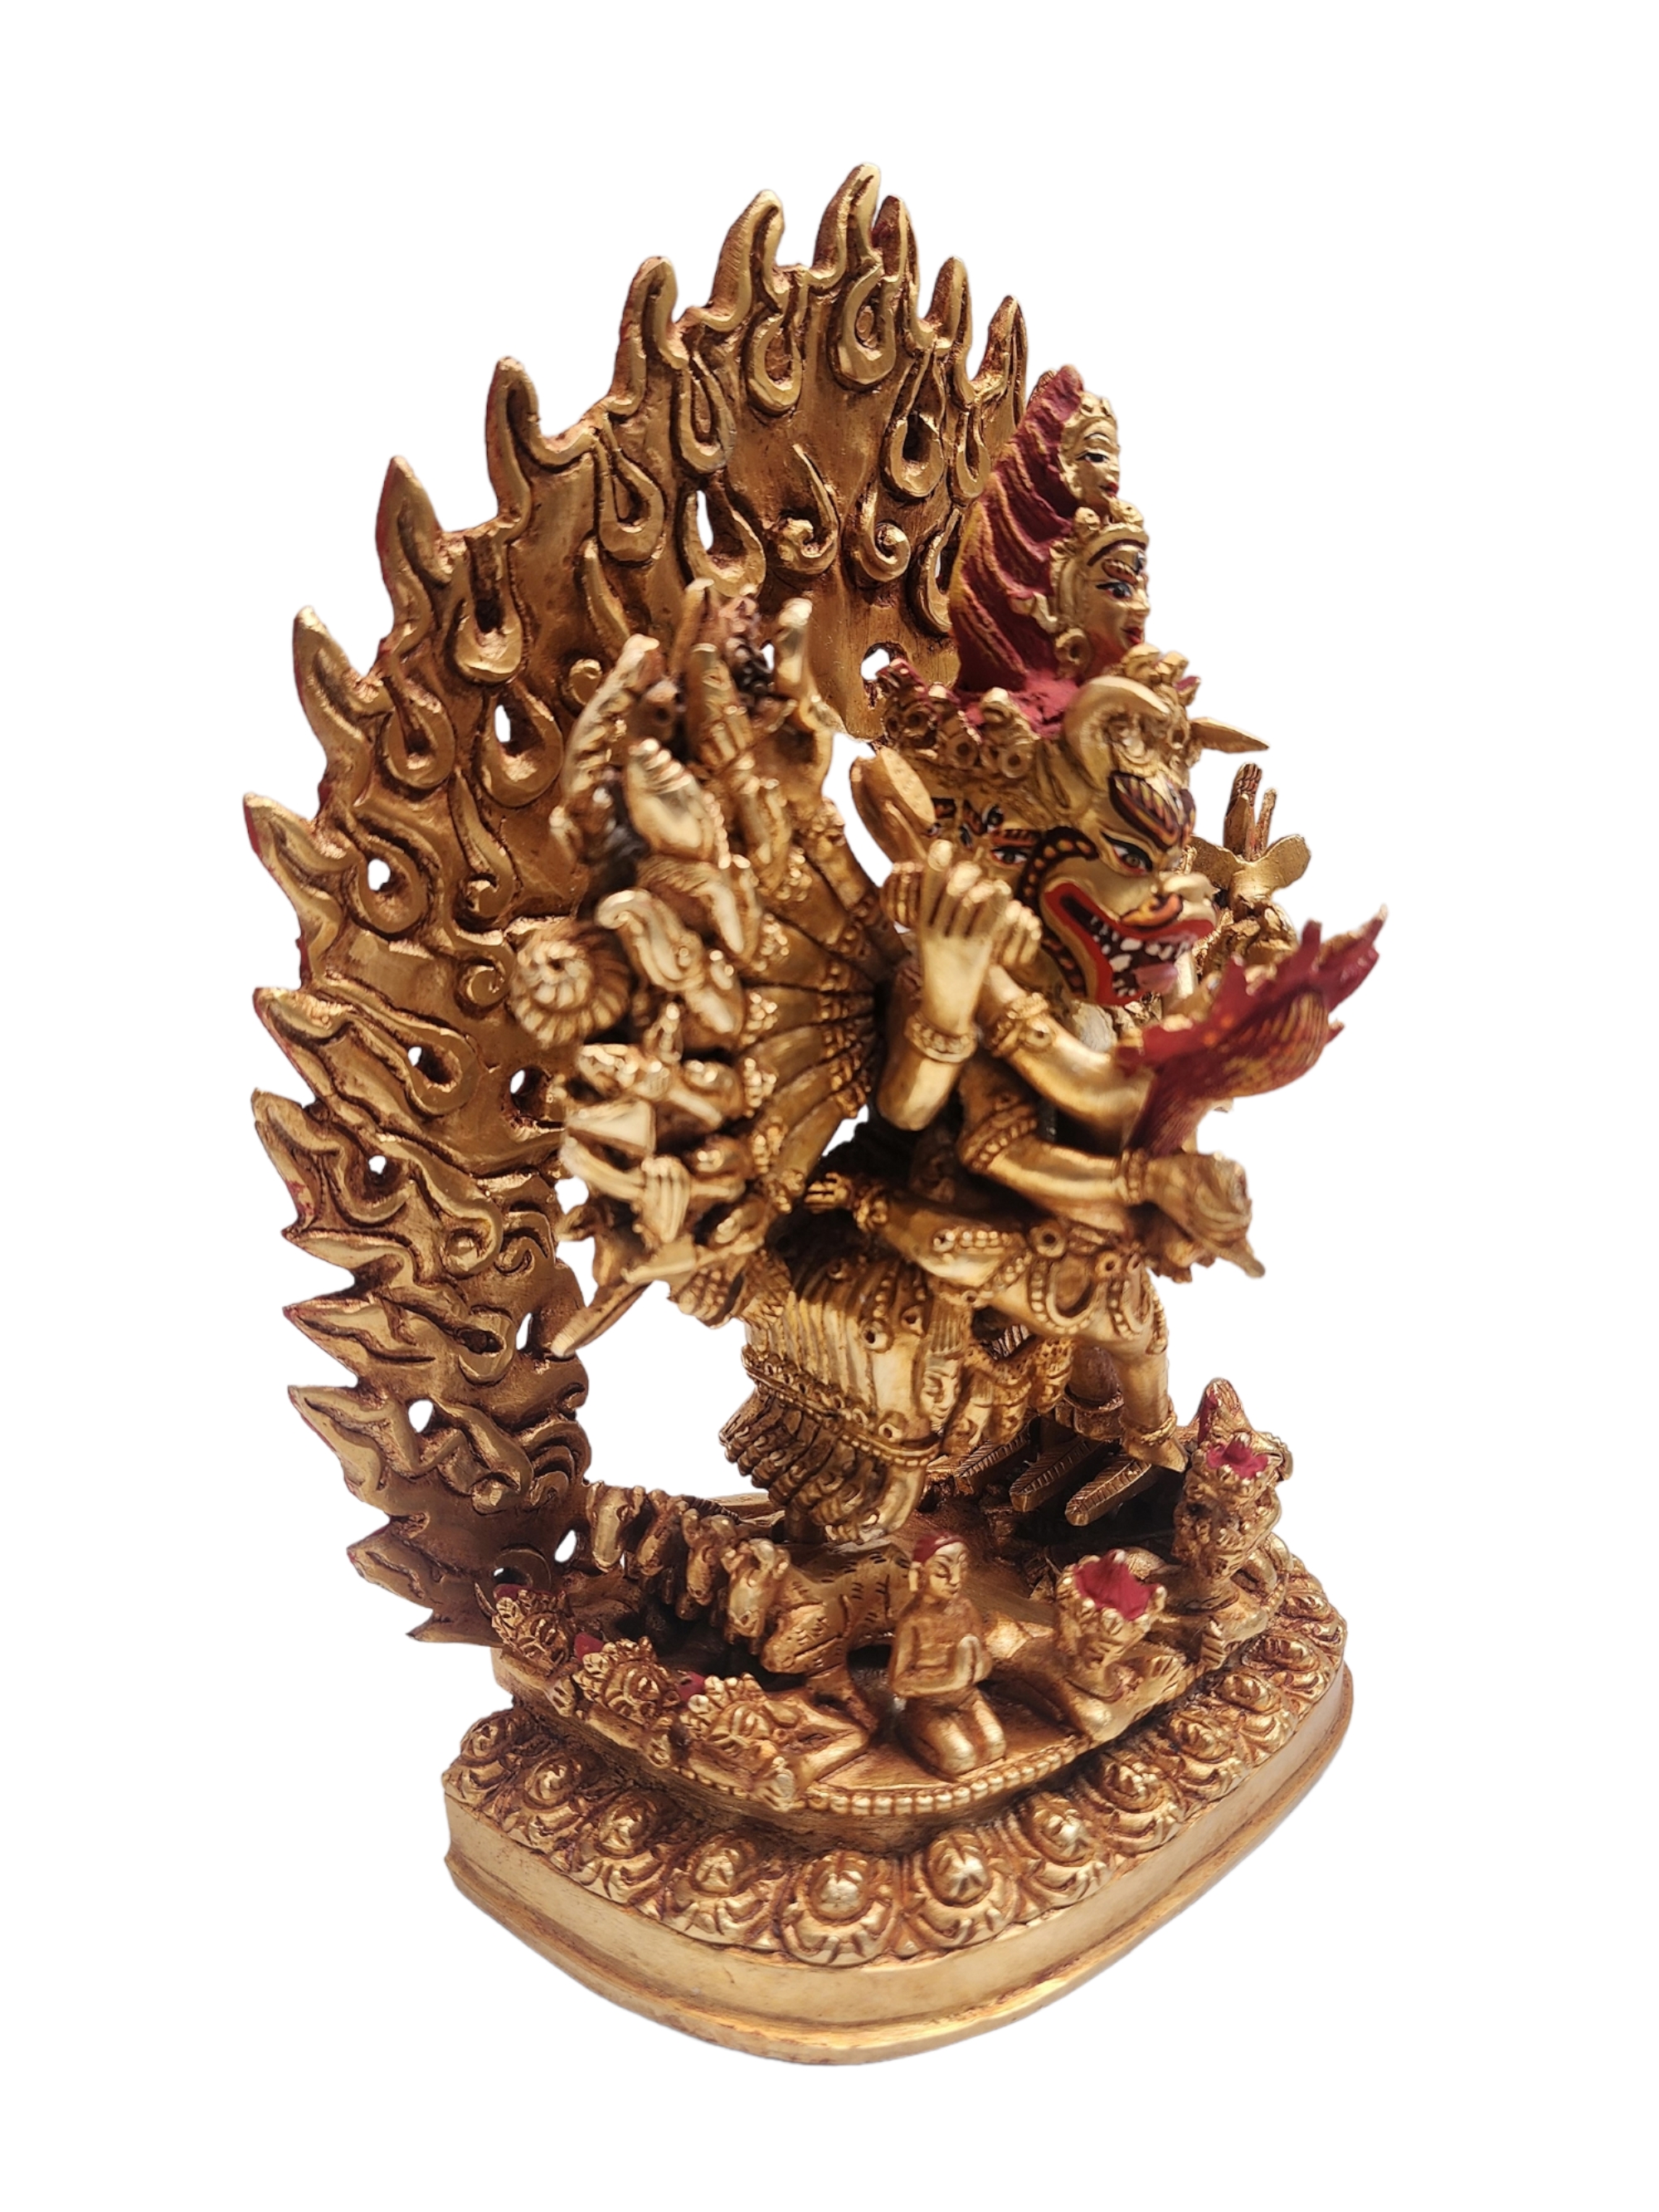 Buddhist Statue Of yamantaka Vajrabhairava, With Full Gold Plated And Painted Face